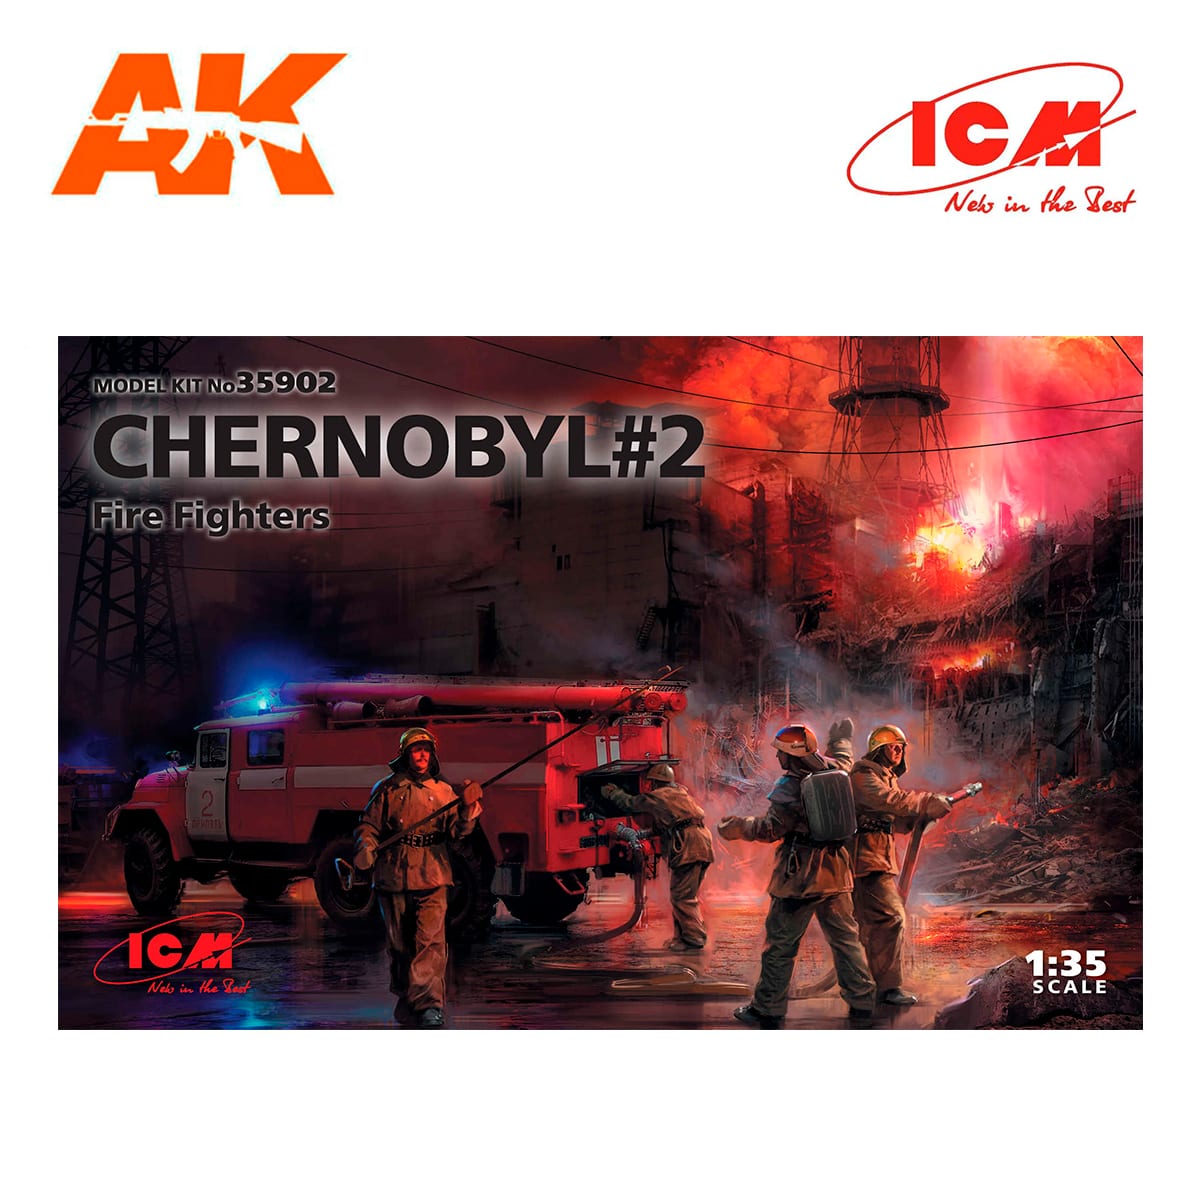 Chernobyl#2. Fire Fighters (AC-40-137A firetruck & 4 figures & diorama base with background) 1/35